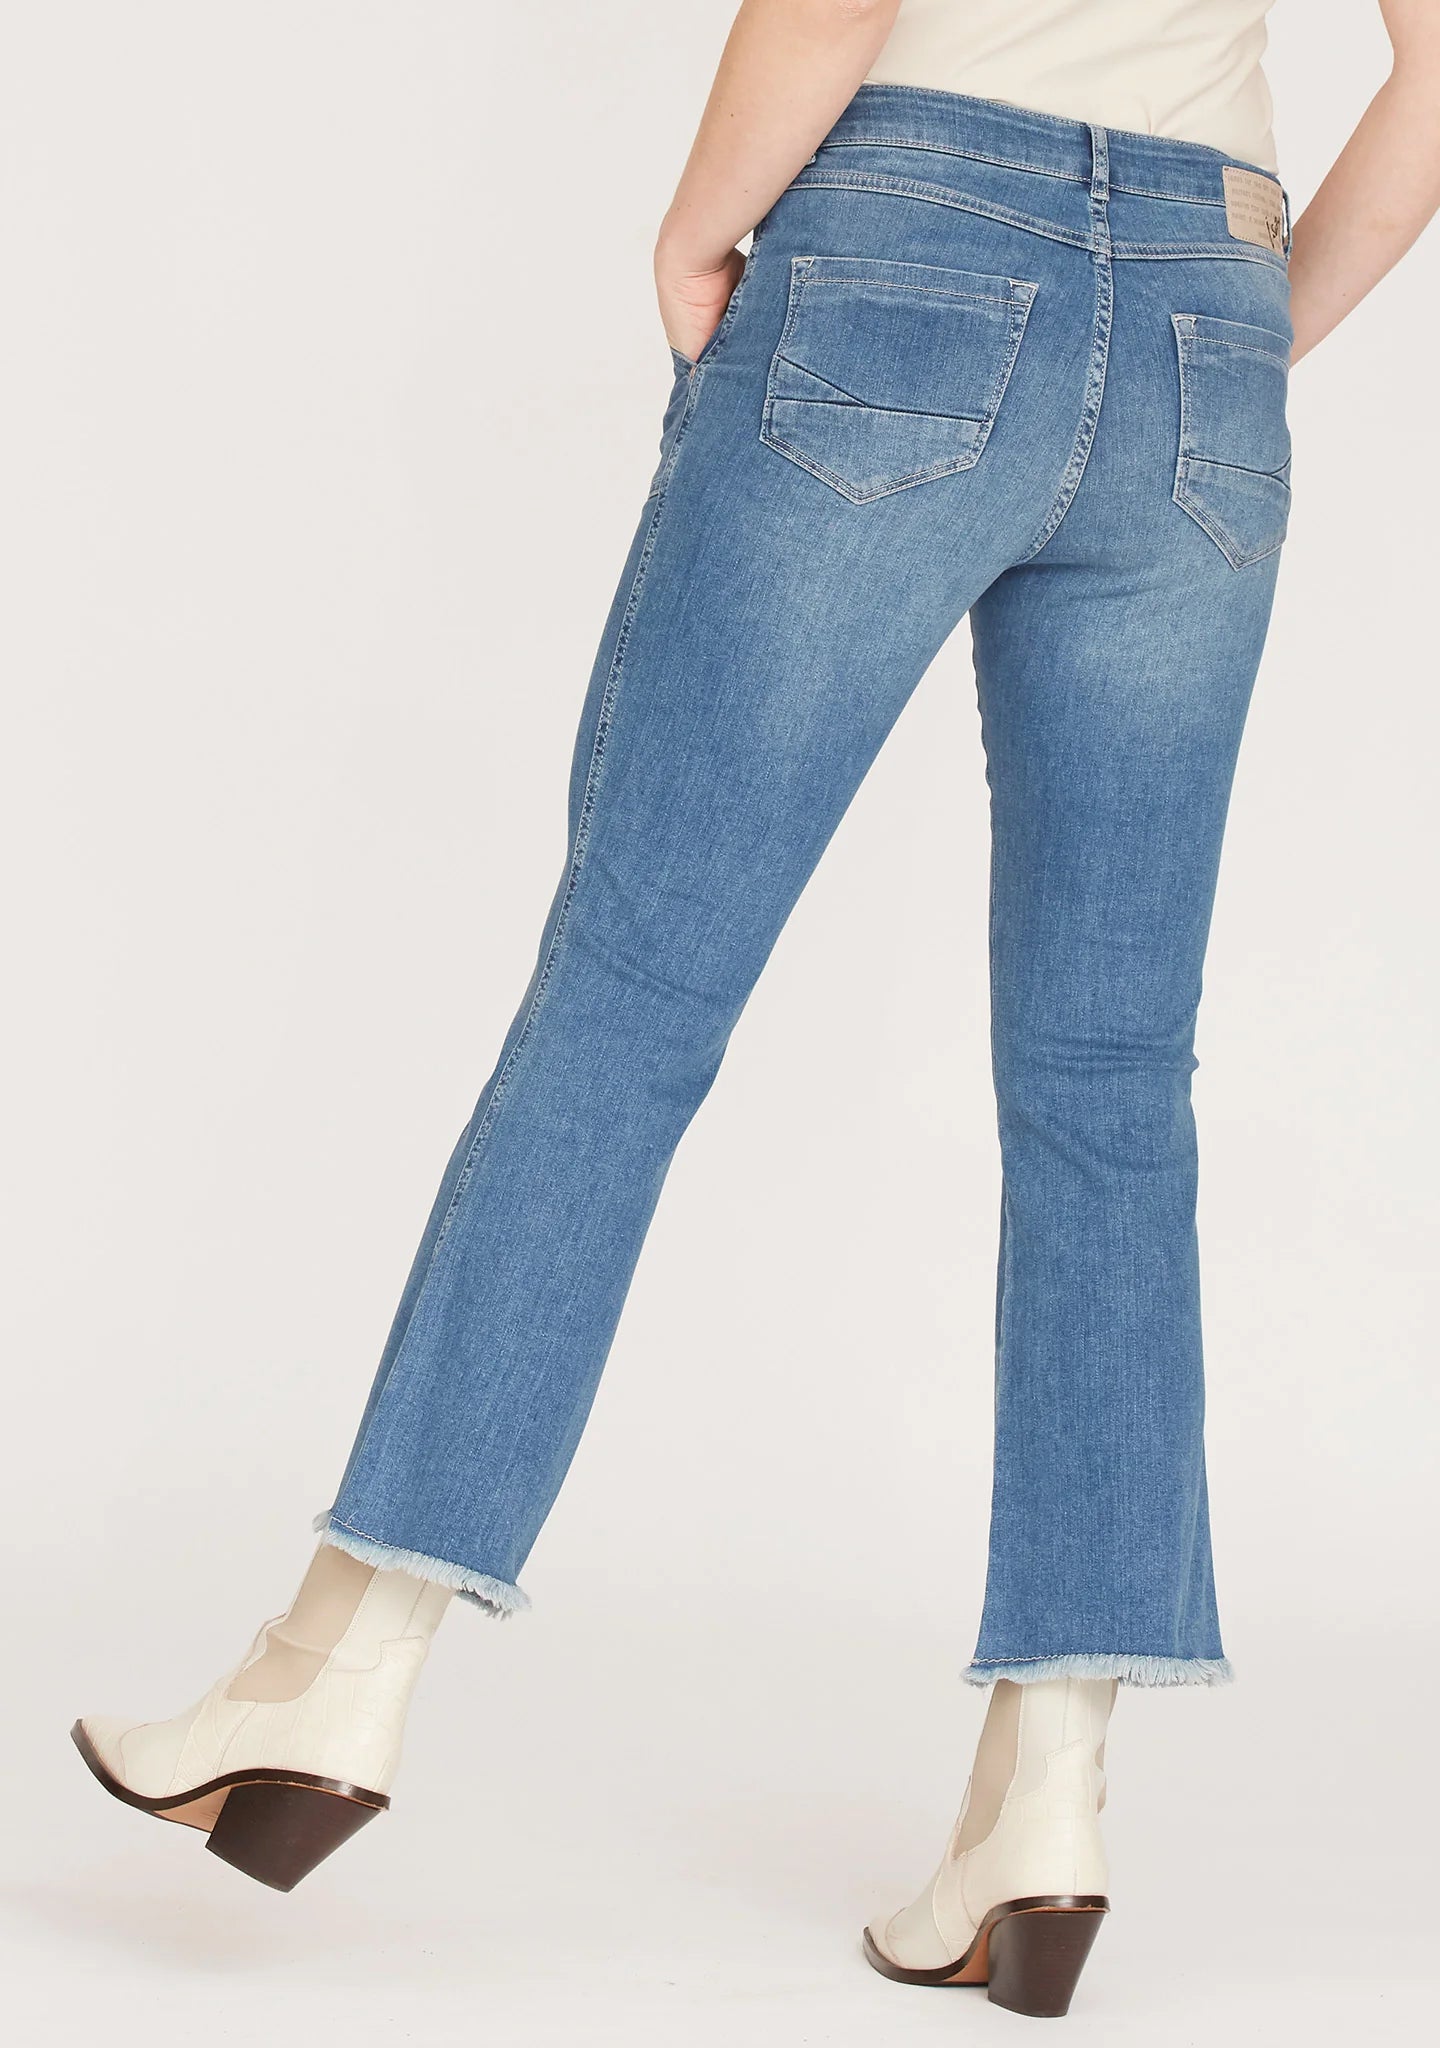 Isay Como Flare Jeans blue wash